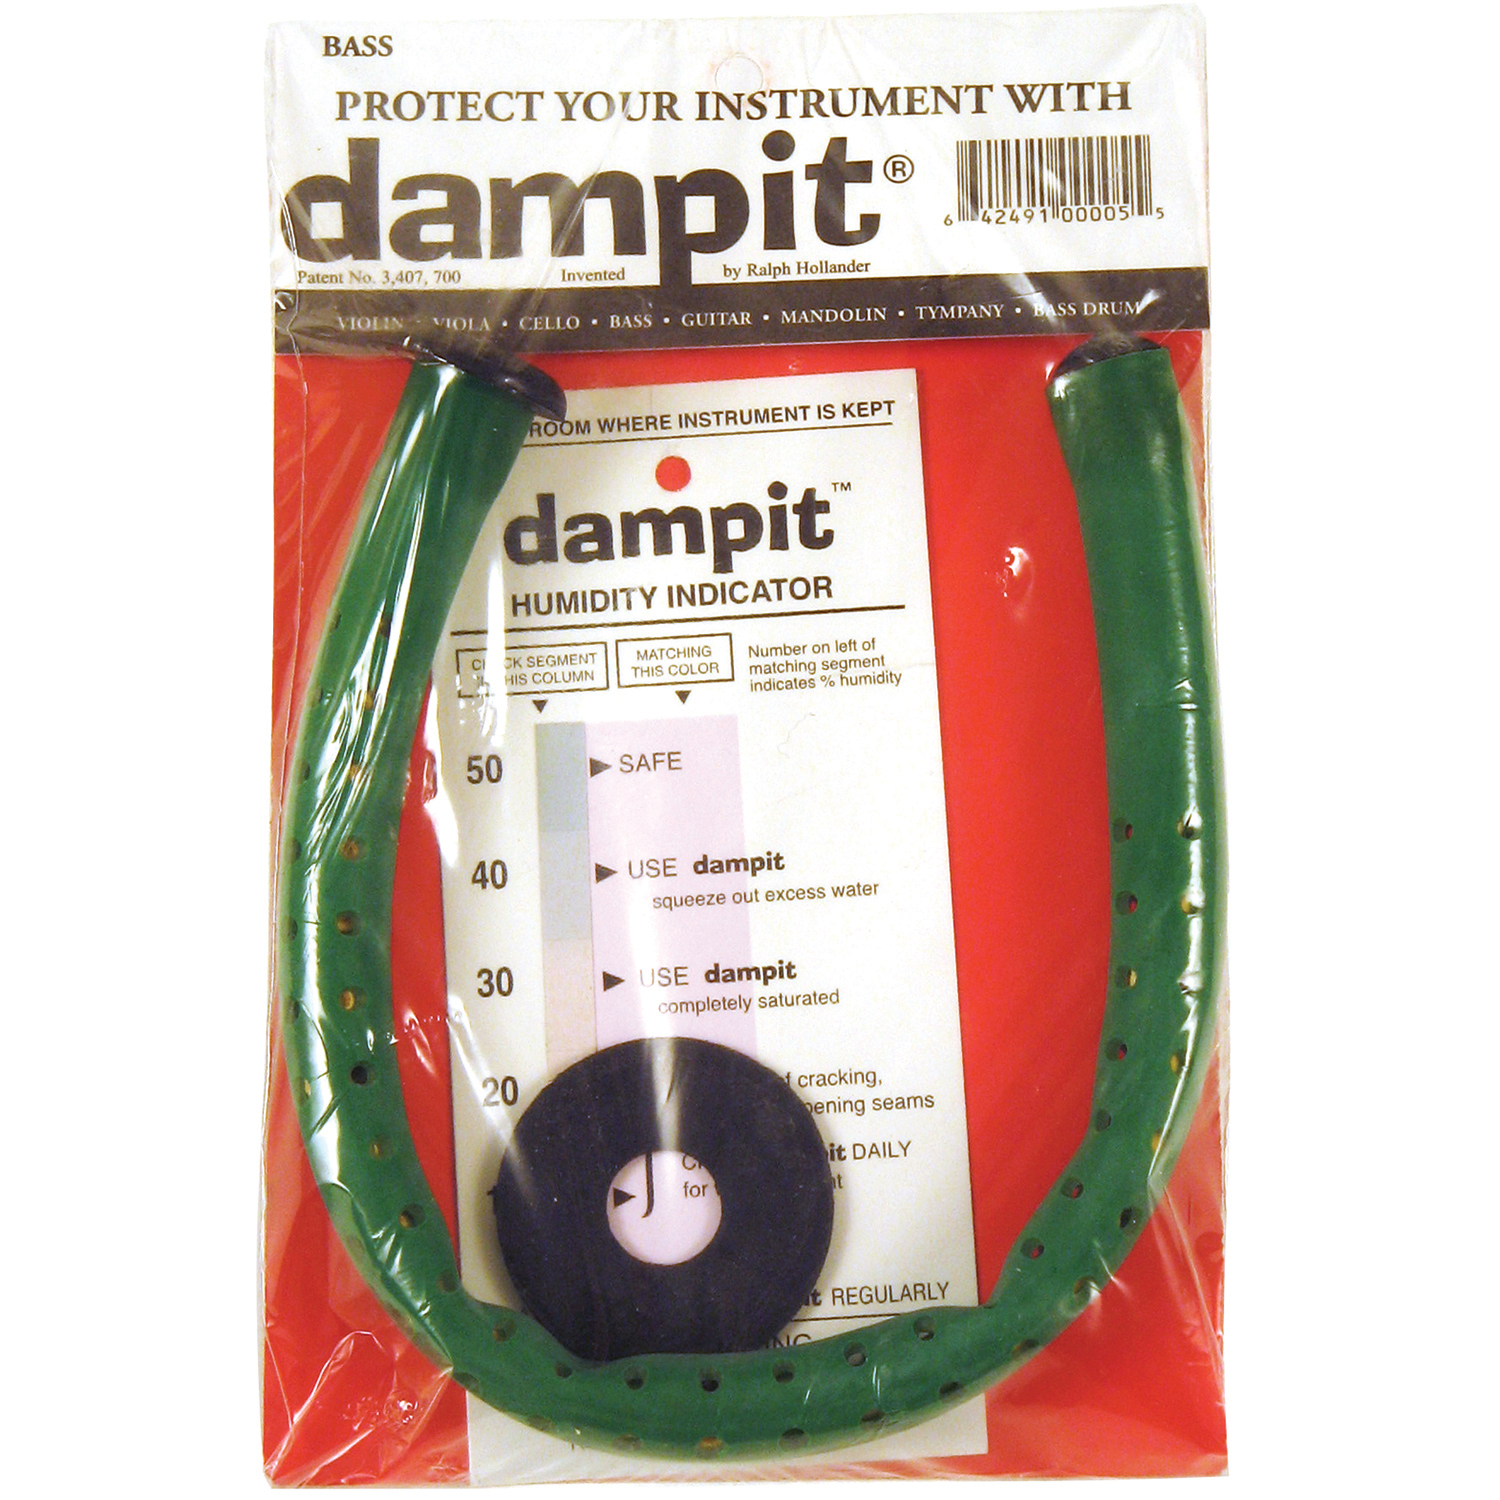 Humidifiers, DAMPIT, bass - image 1 of 2